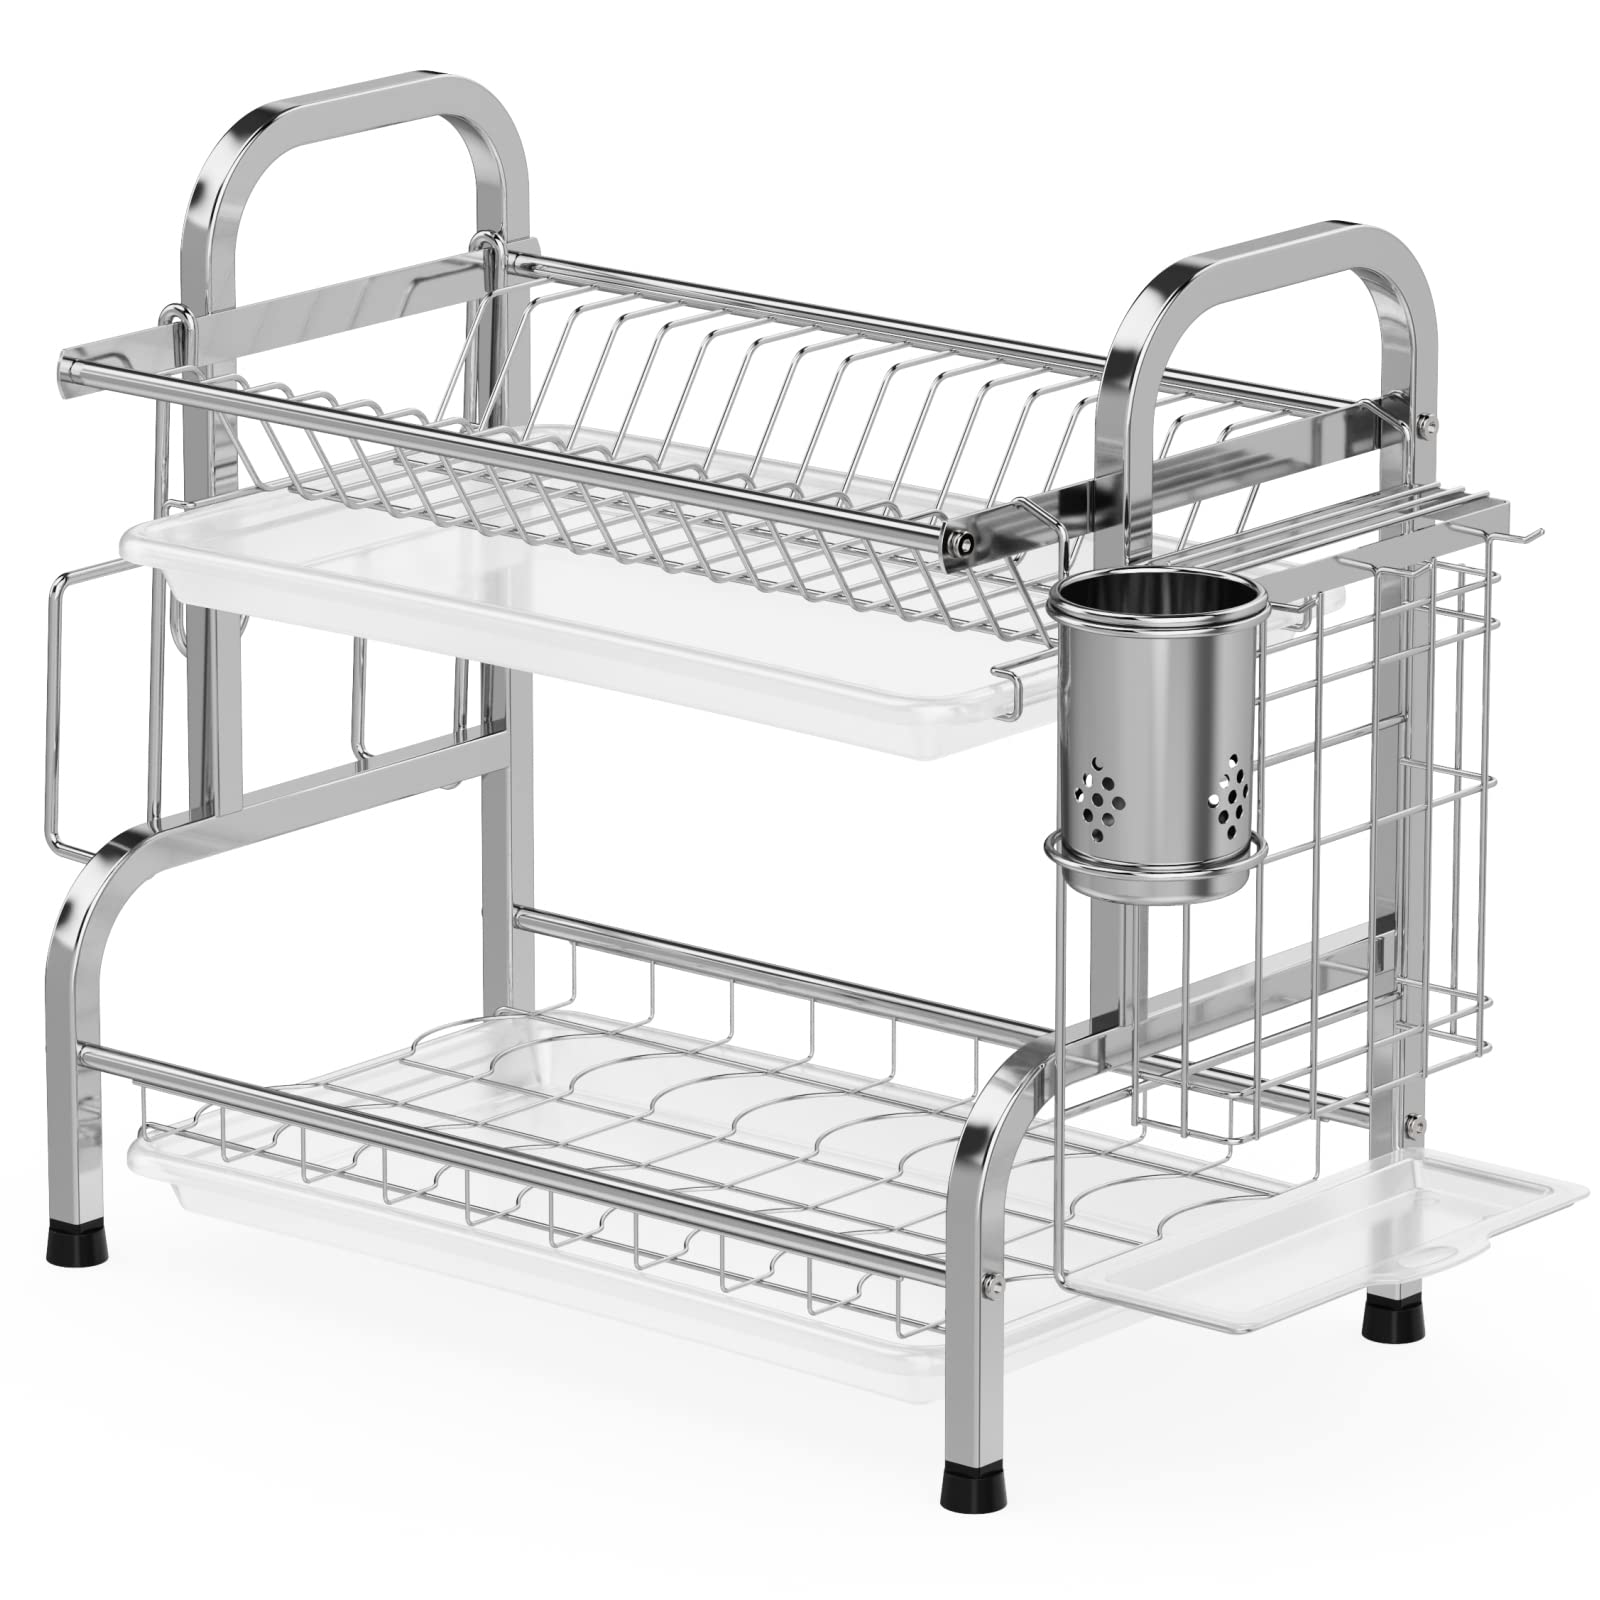 iSPECLE Dish Drying Rack, iSPEcLE 304 Stainless Steel 2-Tier Dish Rack with Utensil Holder, cutting Board Holder and Dish Drainer for Ki